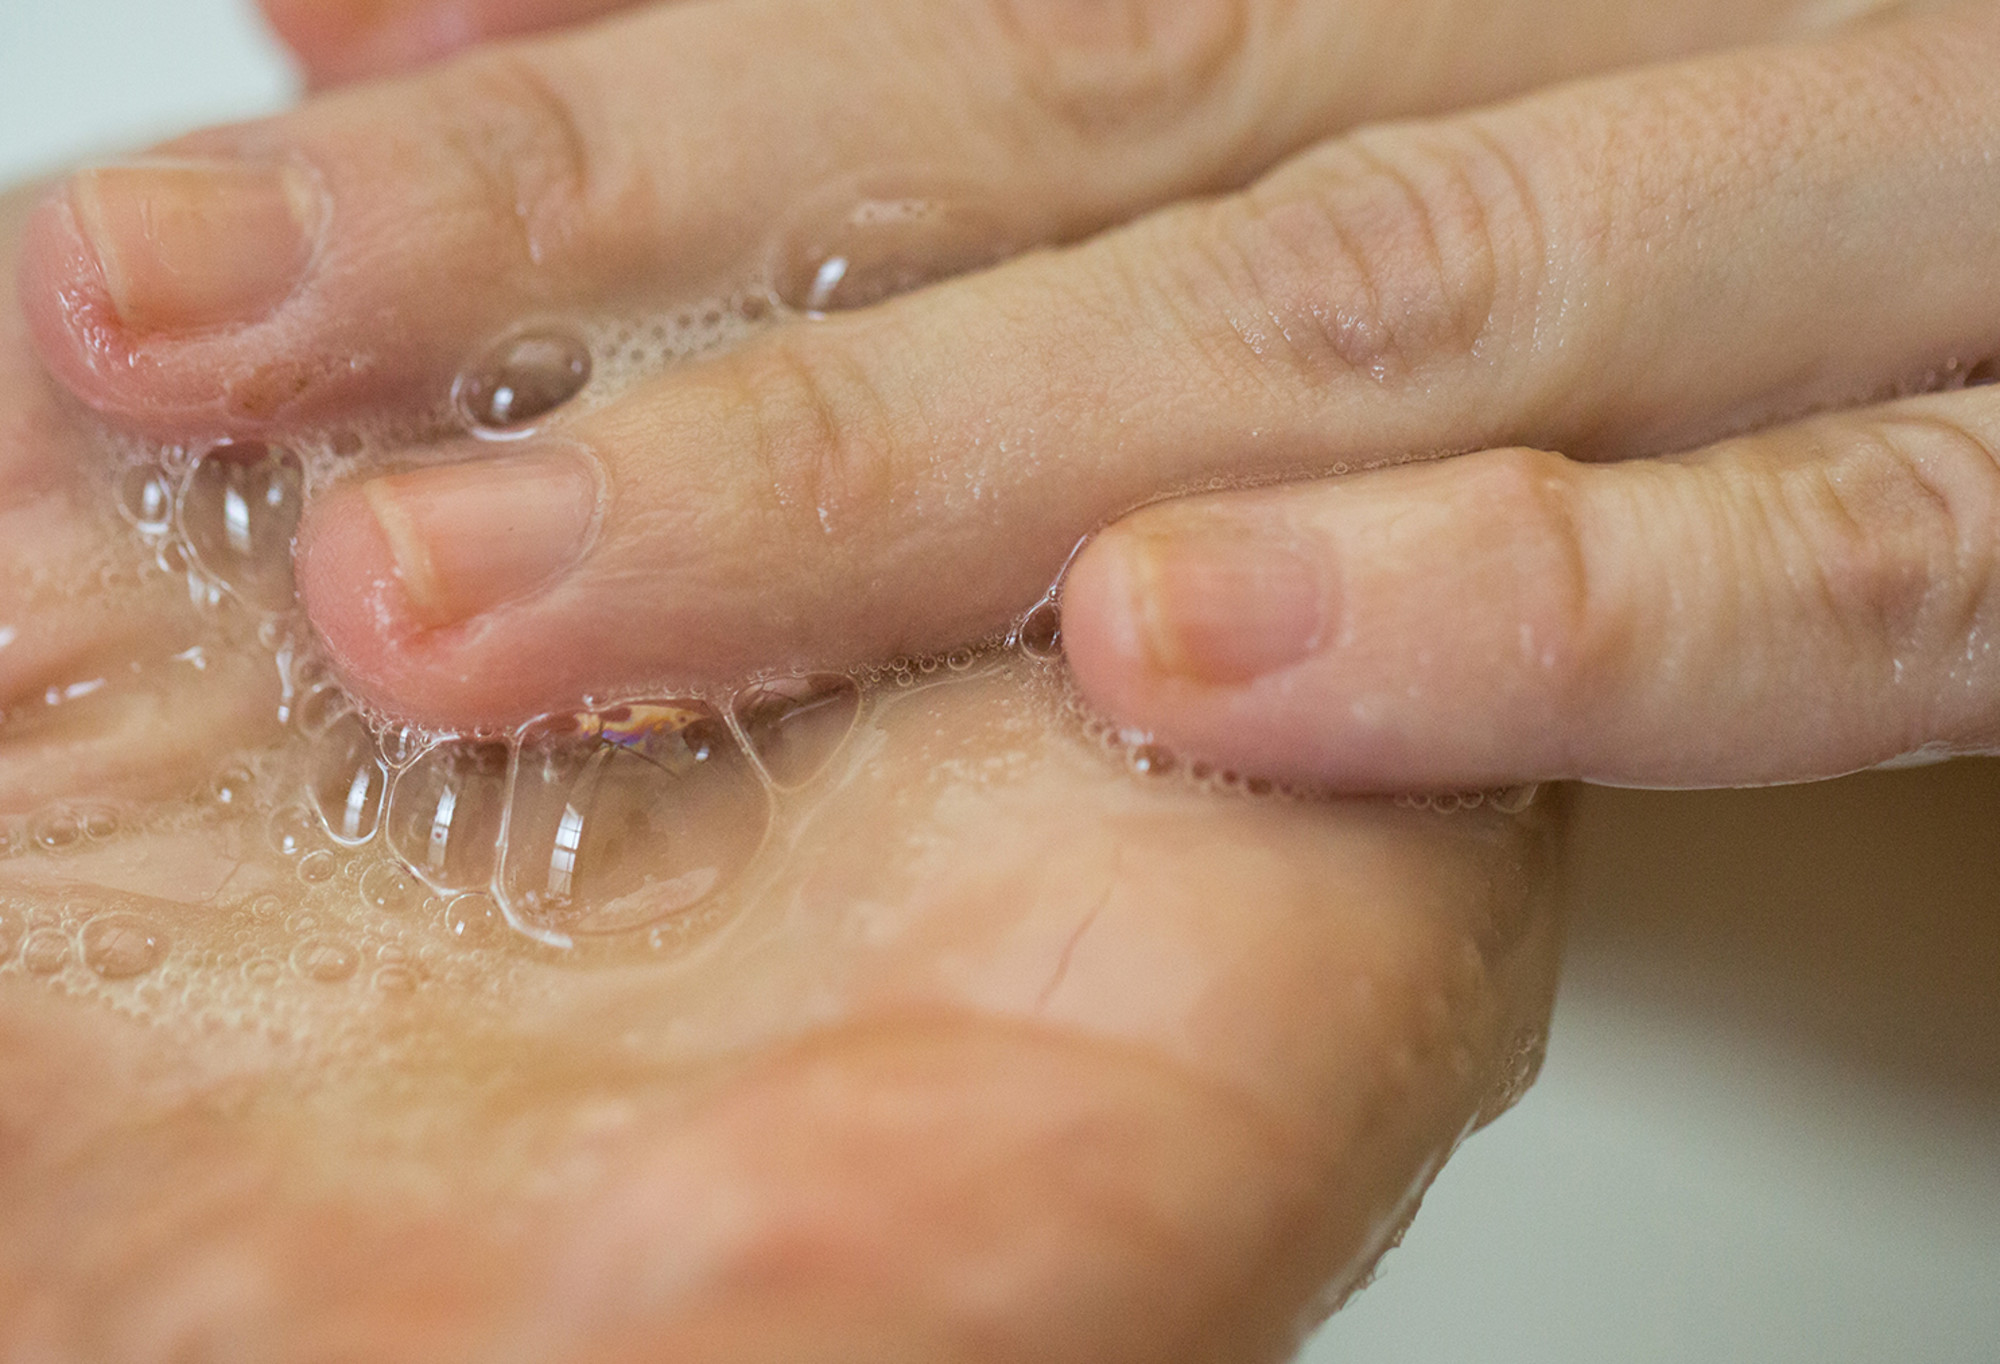 A pale yellow, almost clear, shampoo is rubbed into the palm of the hand, creating lots of bubbles.